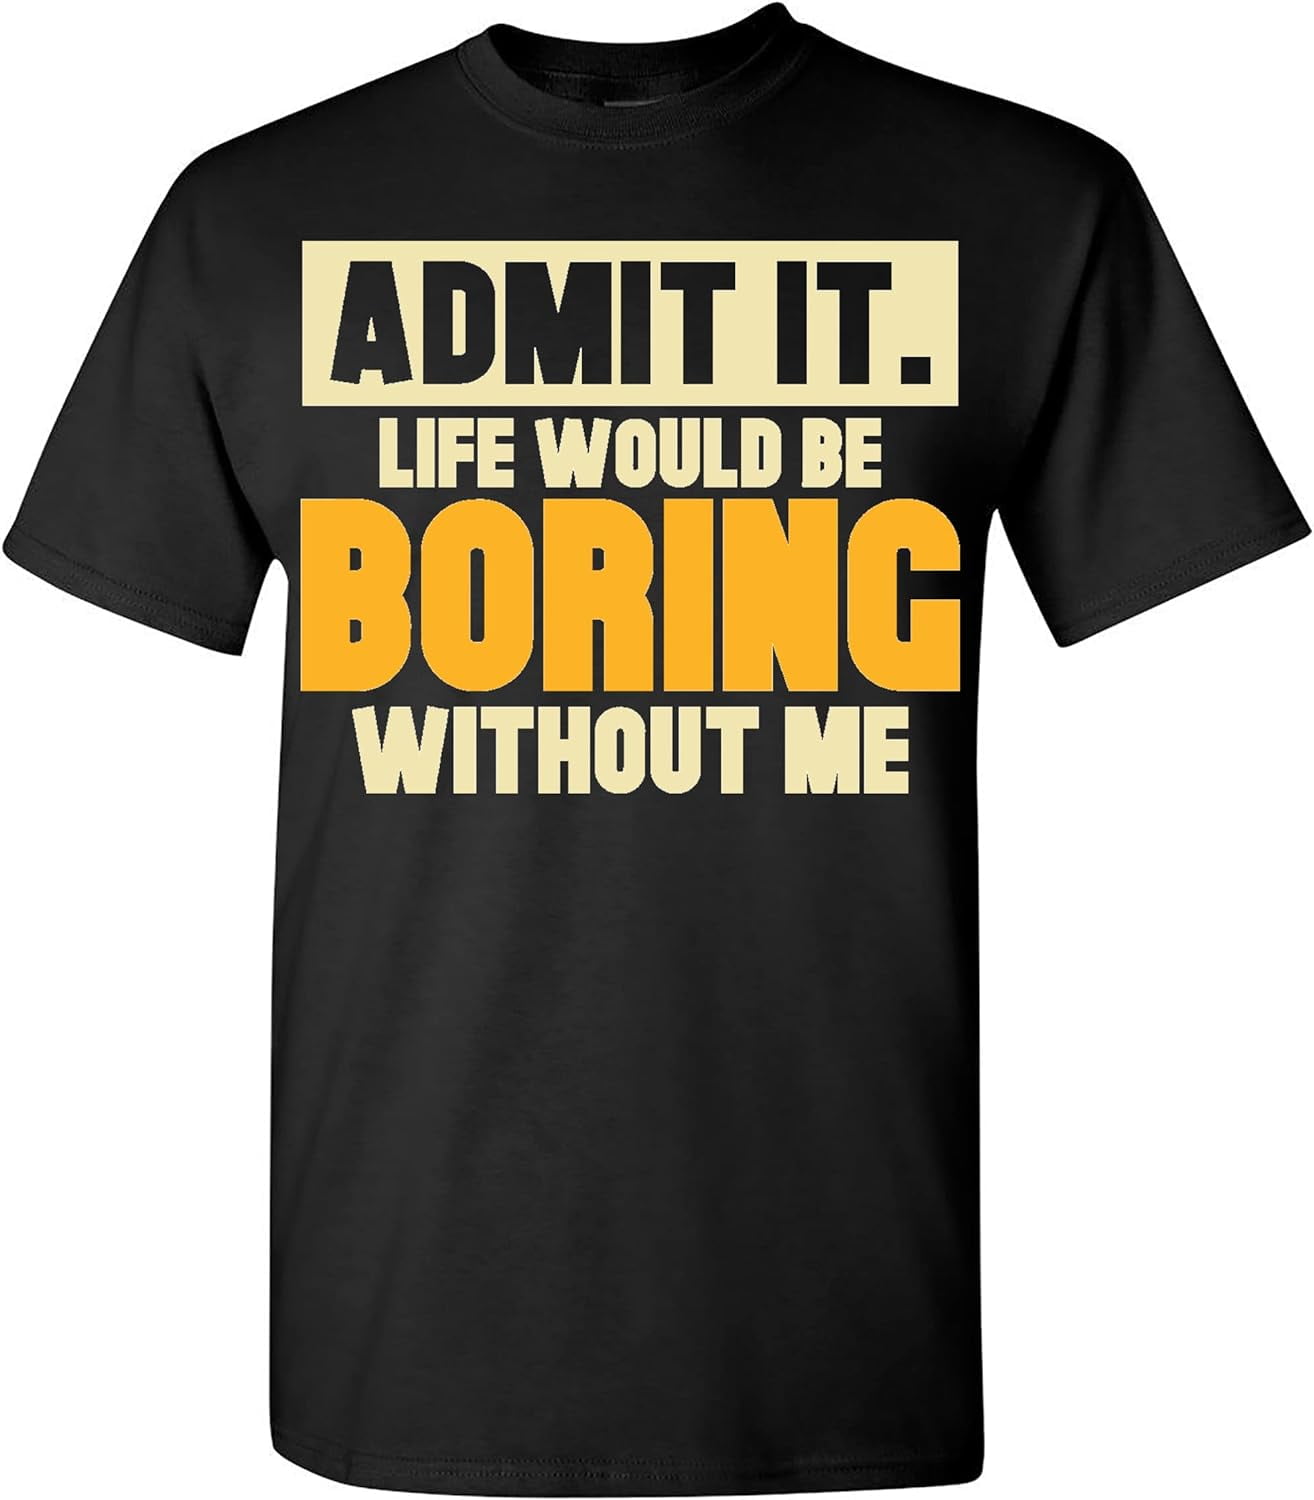 Admit It Life Would Be Boring Without Me T-Shirt Funny Sarcastic Saying ...